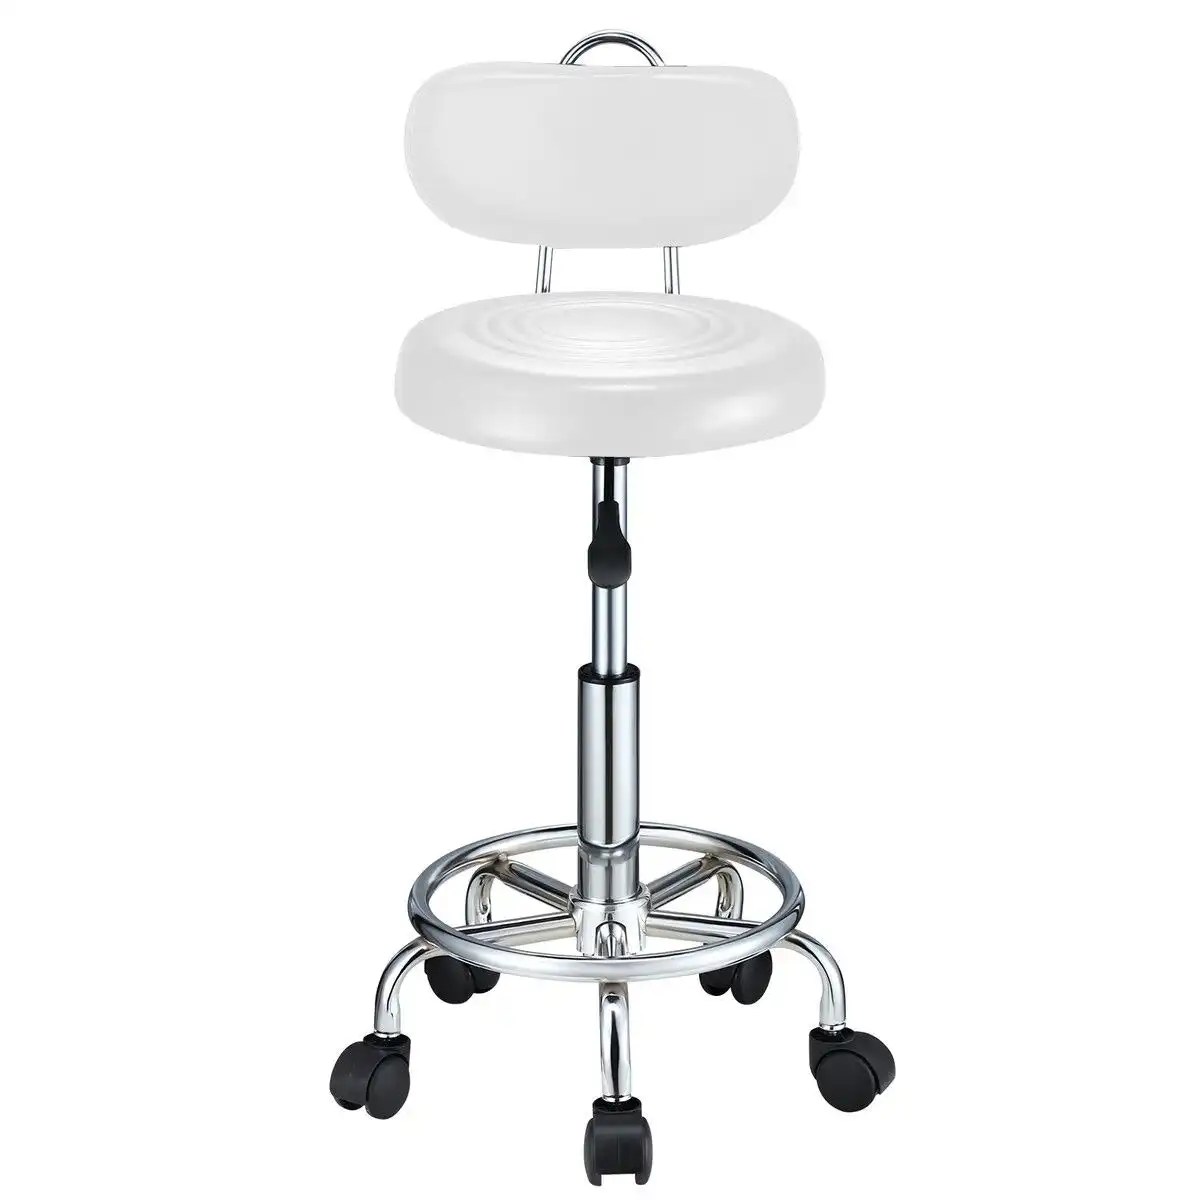 Ausway Barber Salon Chair Stool Height Adjustable Rotatable Clinic Beauty Hairdressing PU White With Back